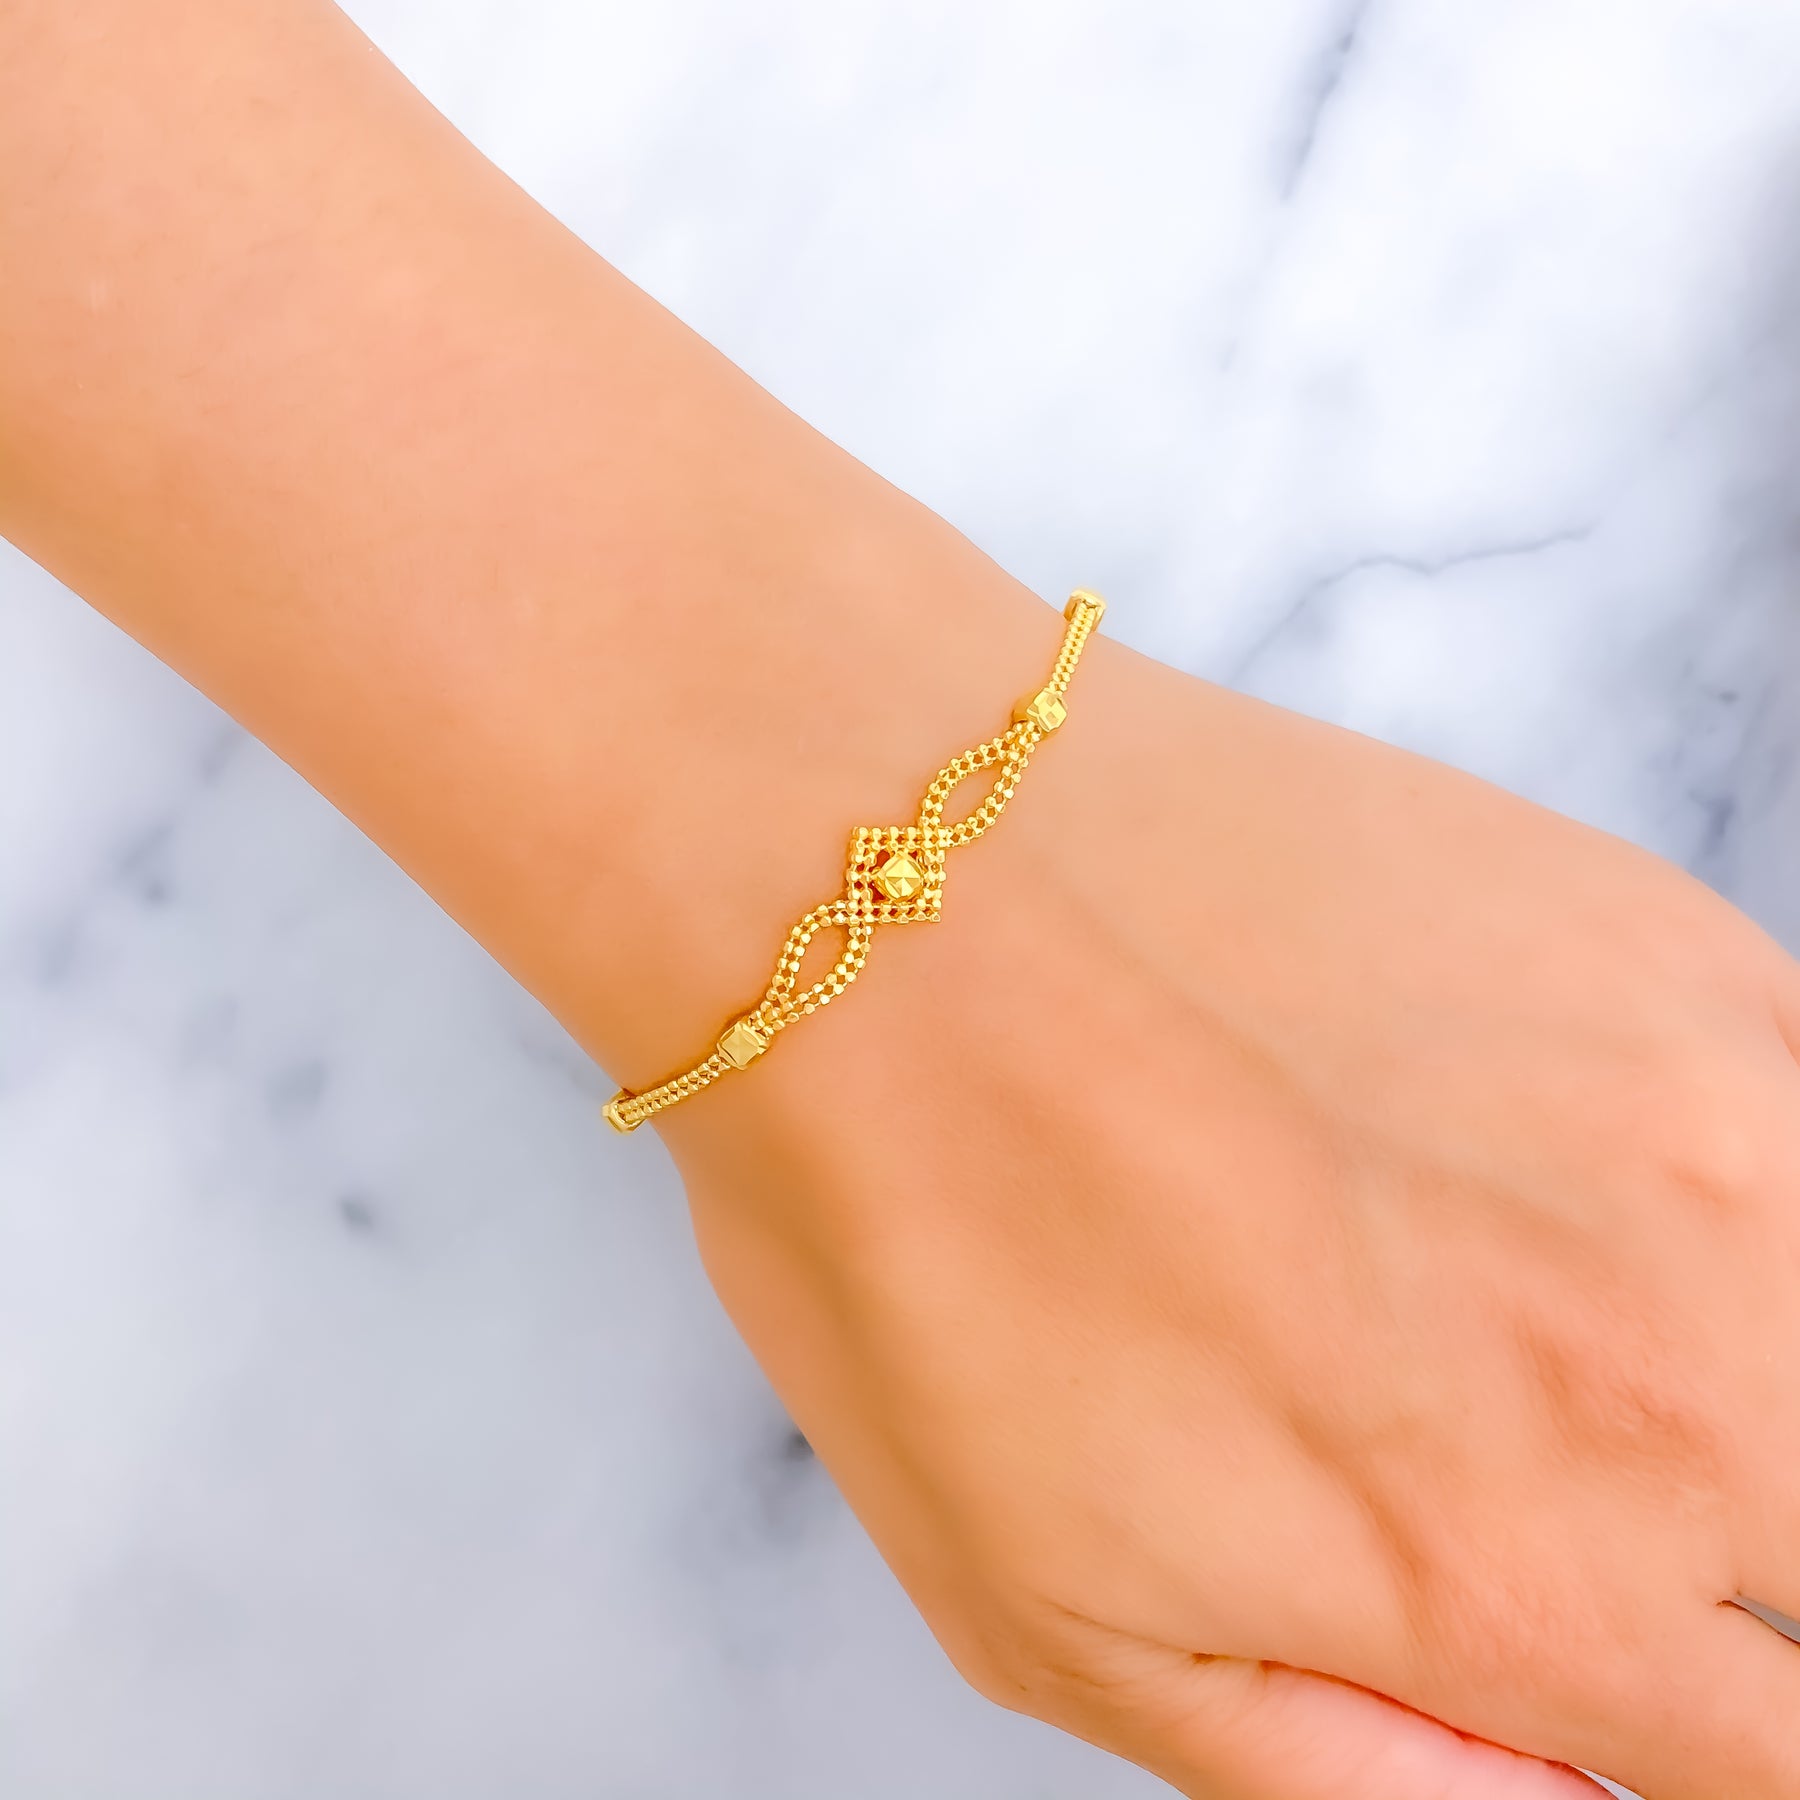 18K Gold Plated Stainless Steel Bangle Bracelet With Cuff Chain Fashionable  Womens Wristband For Lovers Perfect Gift WED304Z From Ai821, $11.85 |  DHgate.Com